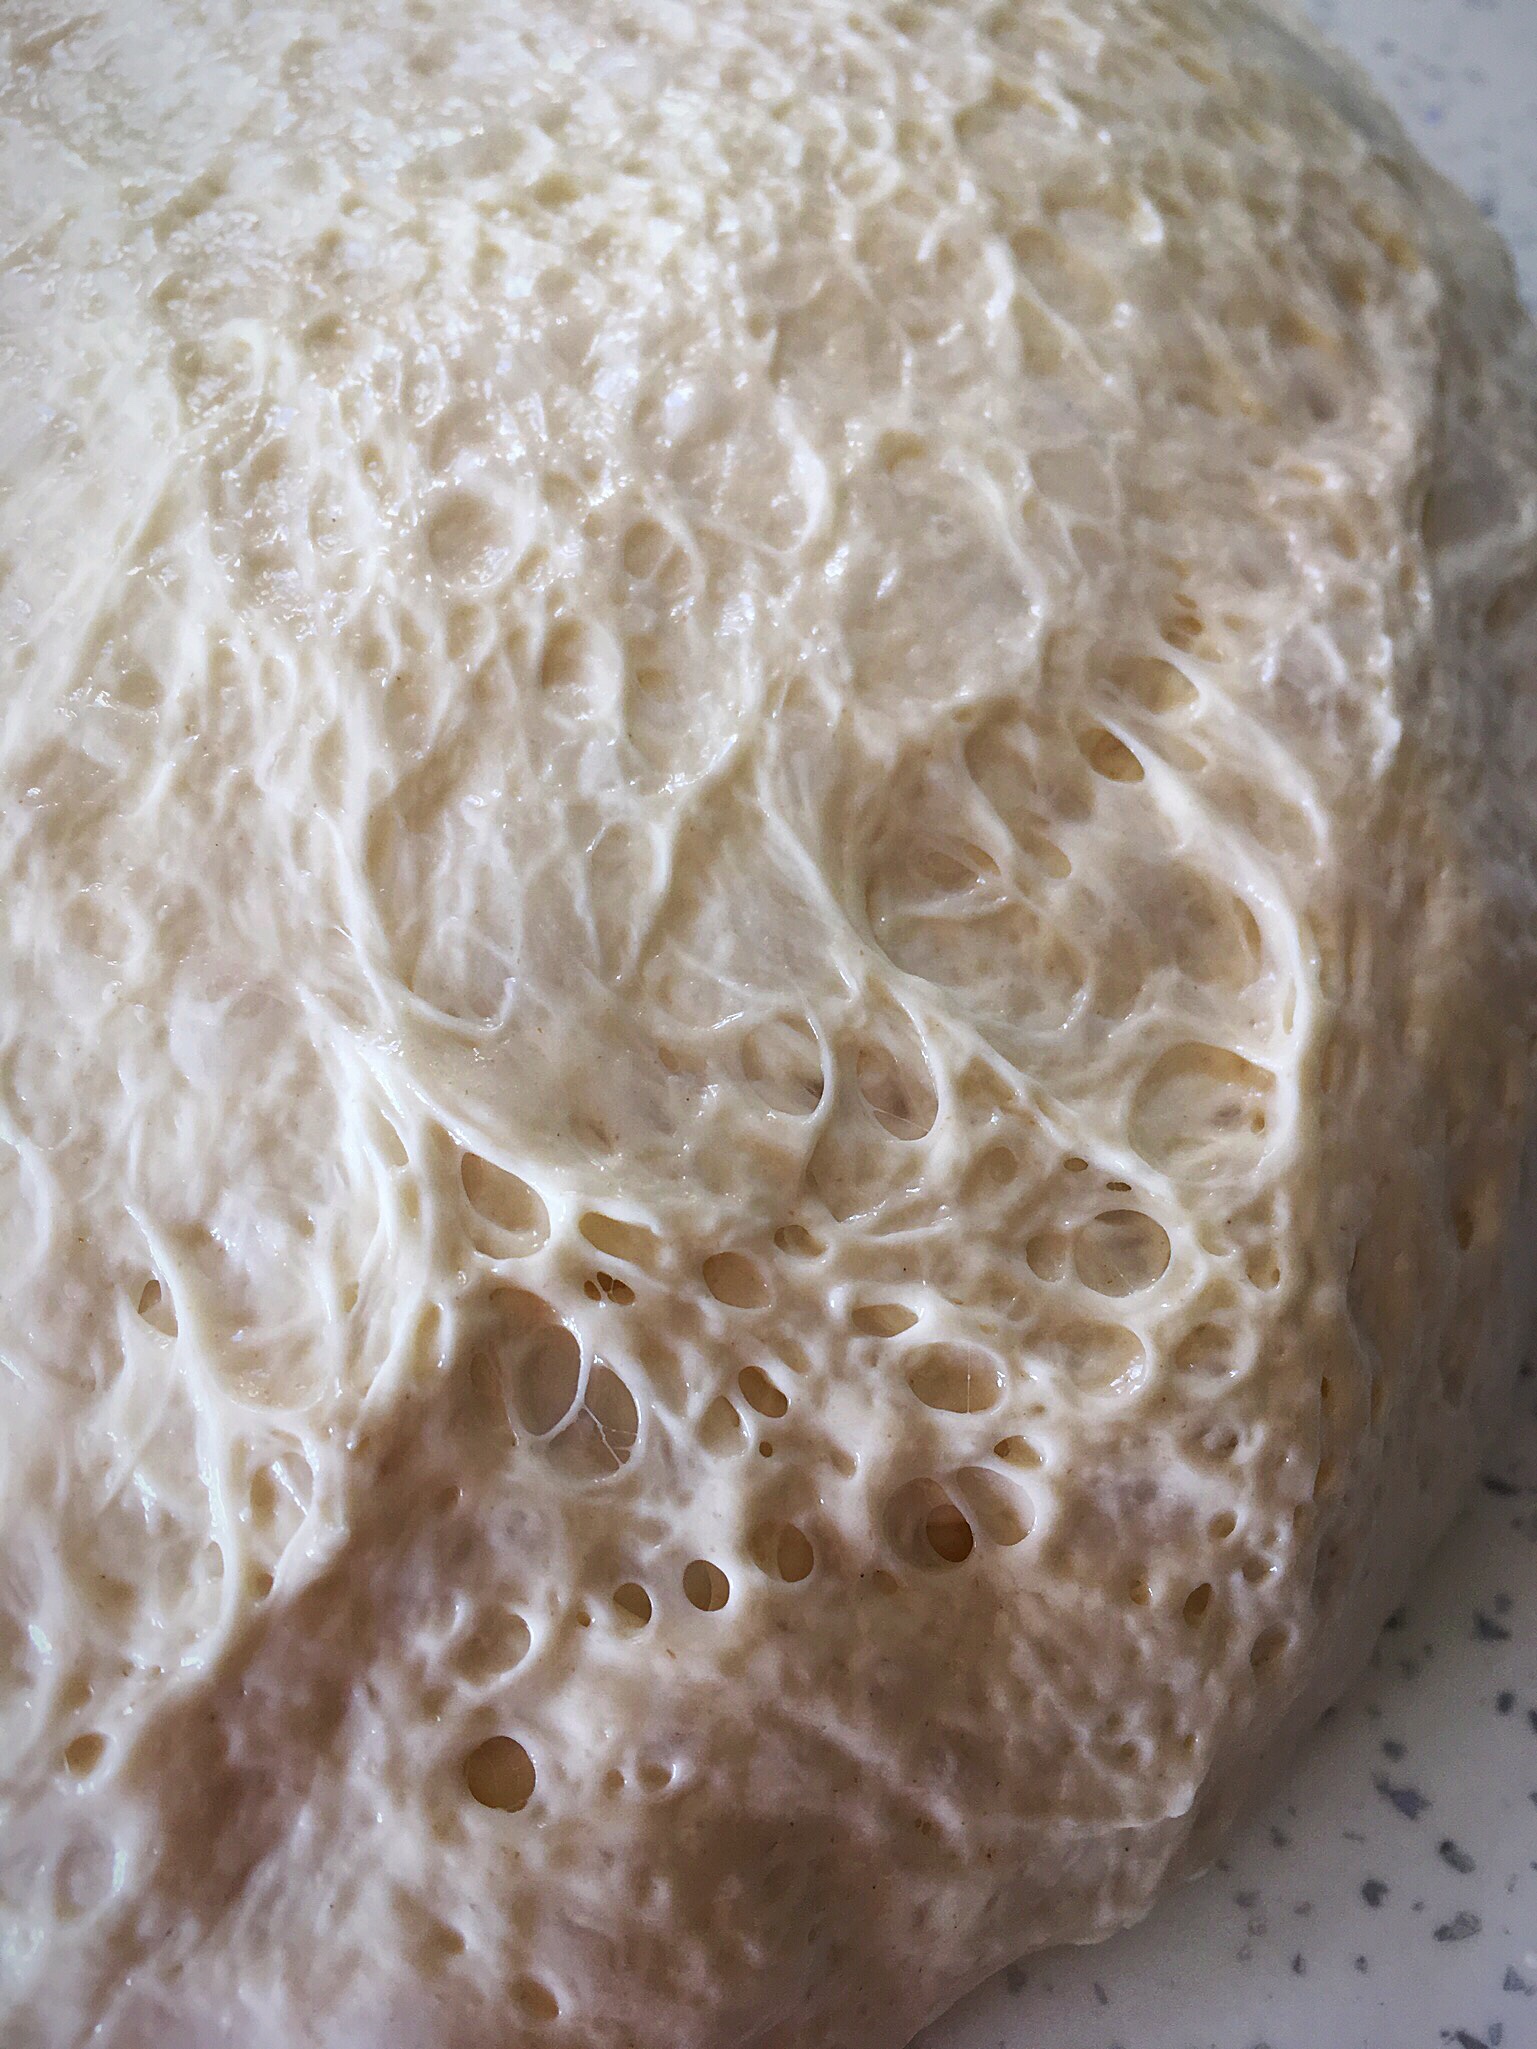 A close up of the crust on a pizza.